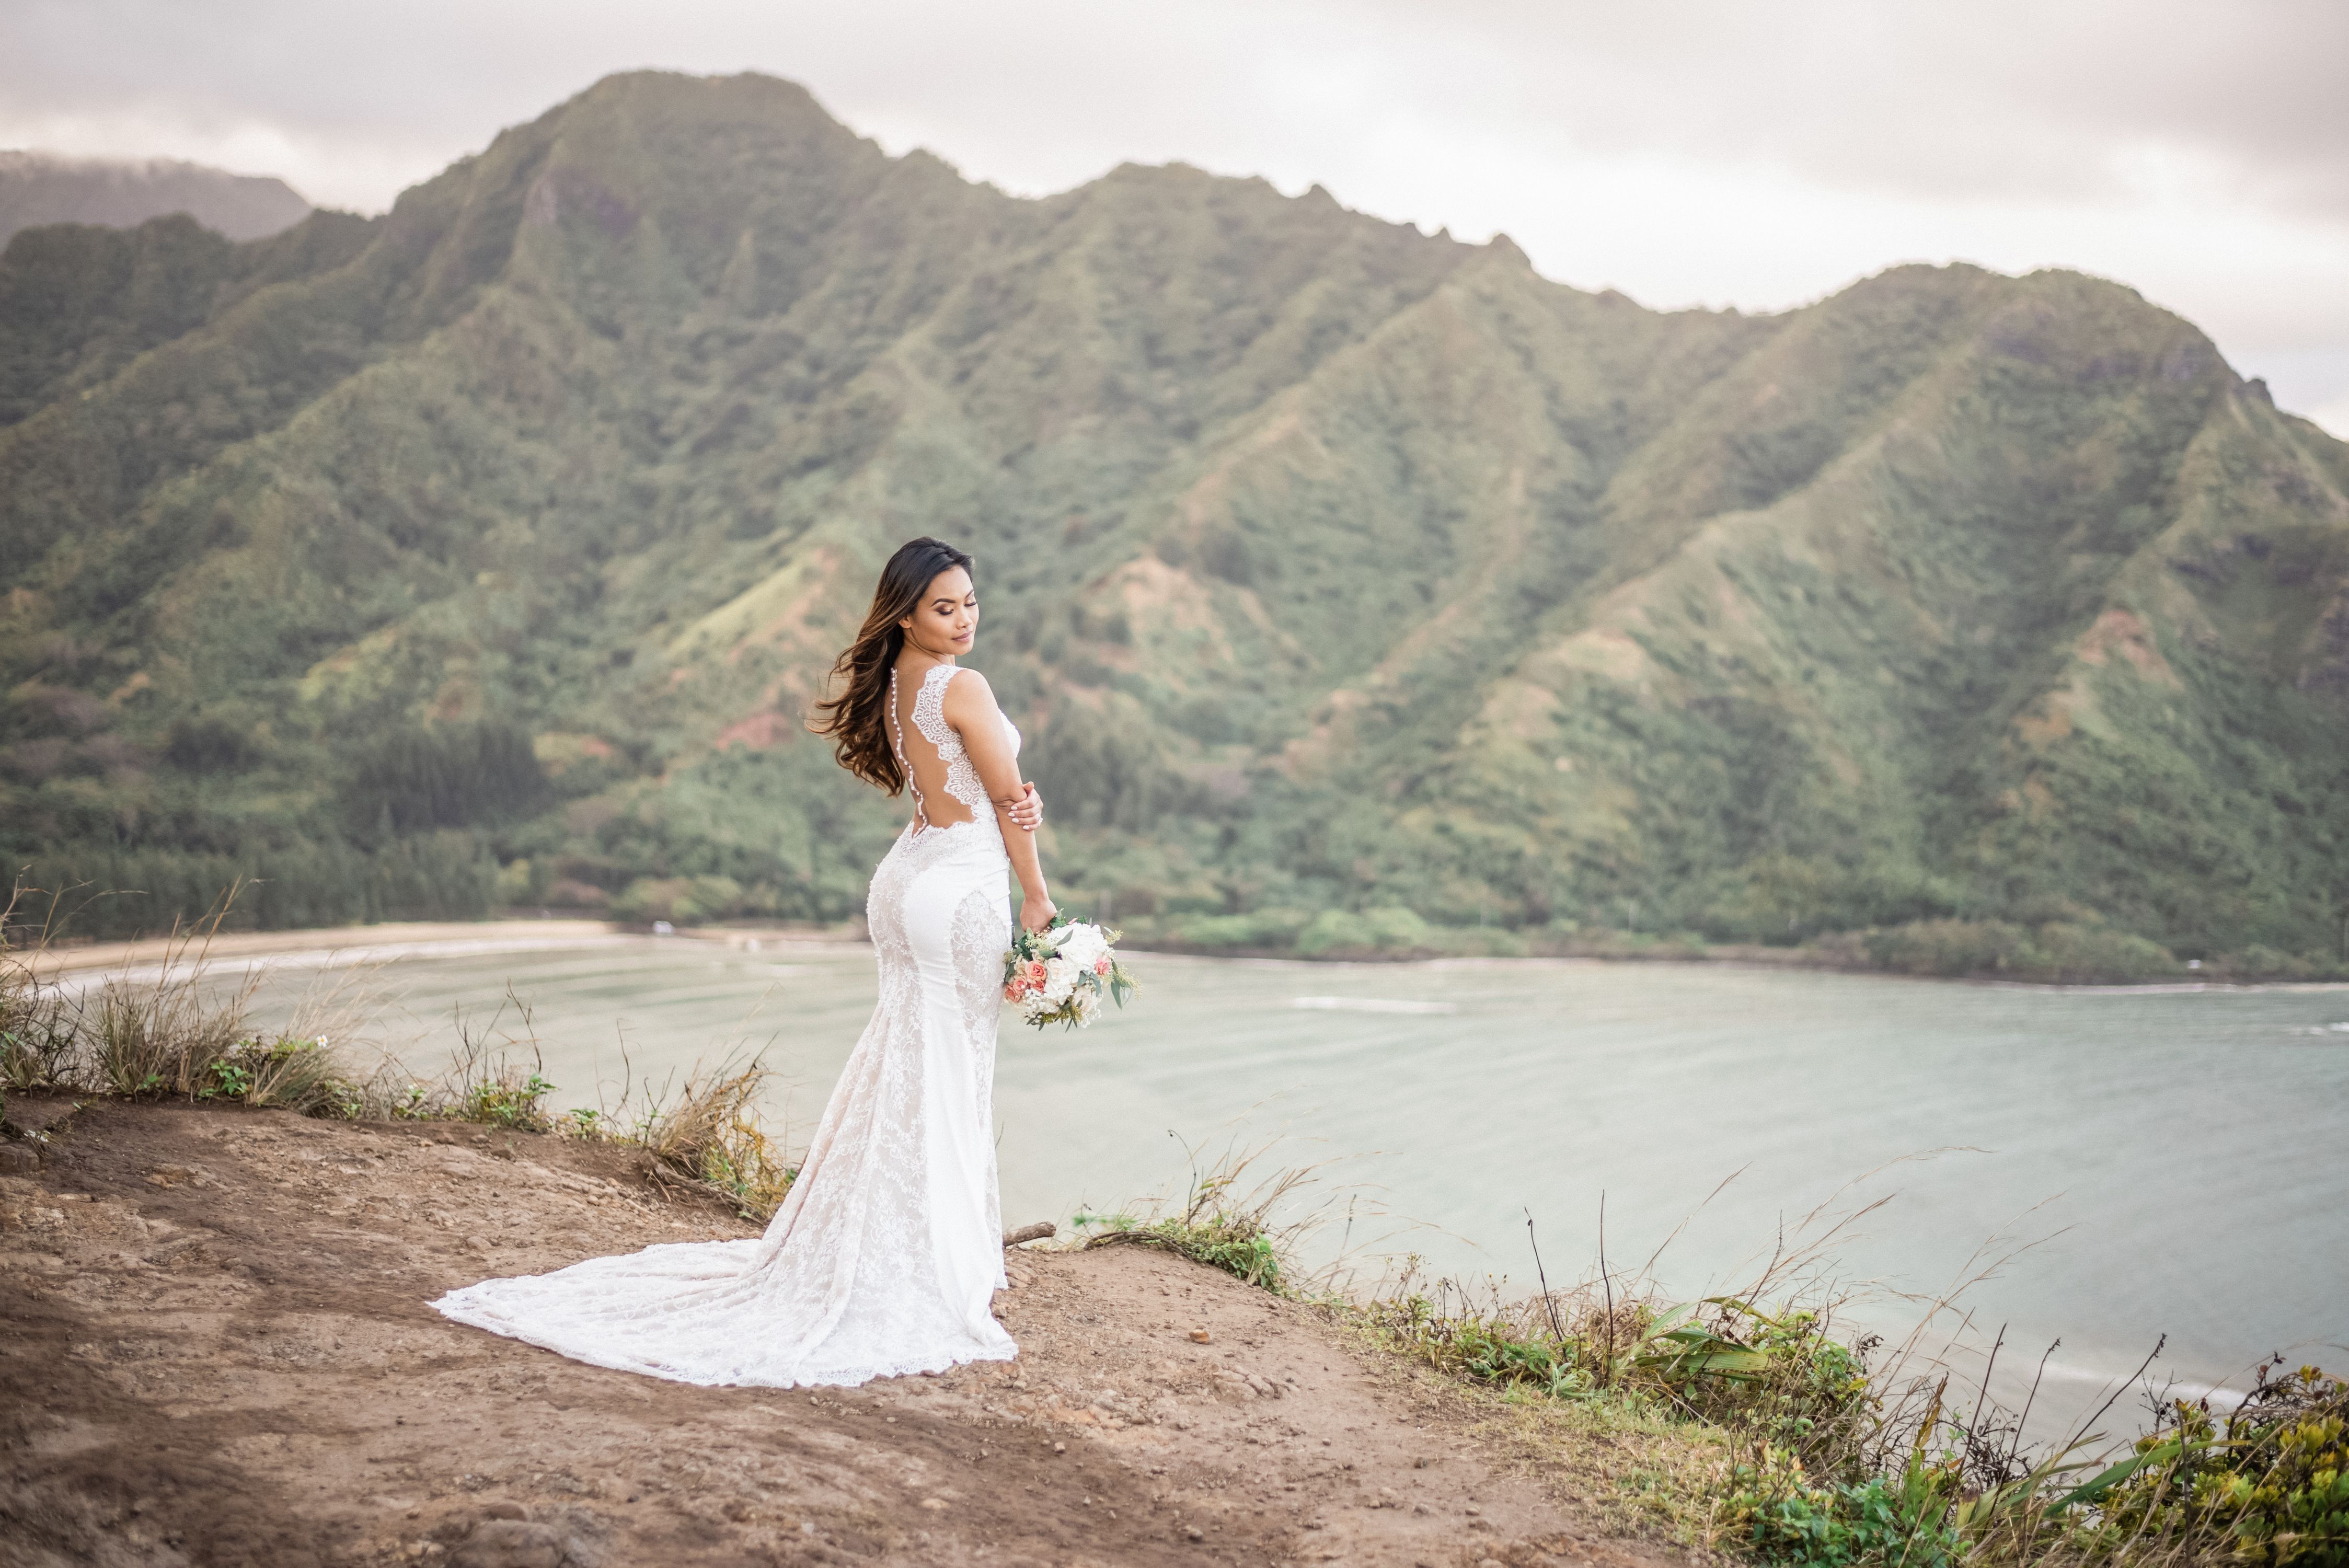 Hawaii Wedding Photo and Video packages